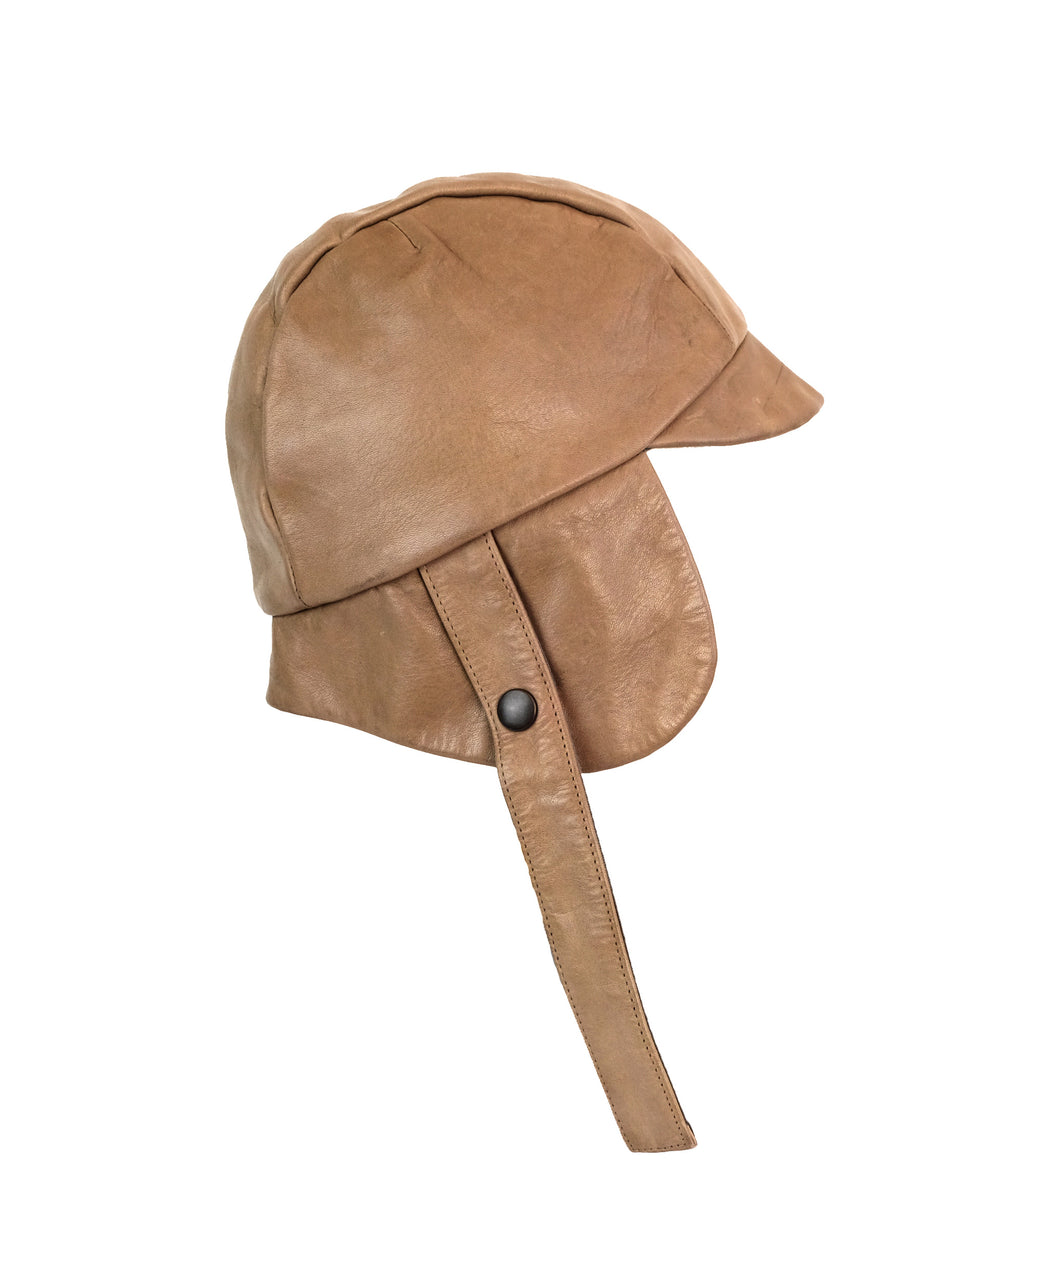 Ally Capellino Aviator Hat – Menage in Vintage Leather, Taupe M Modern